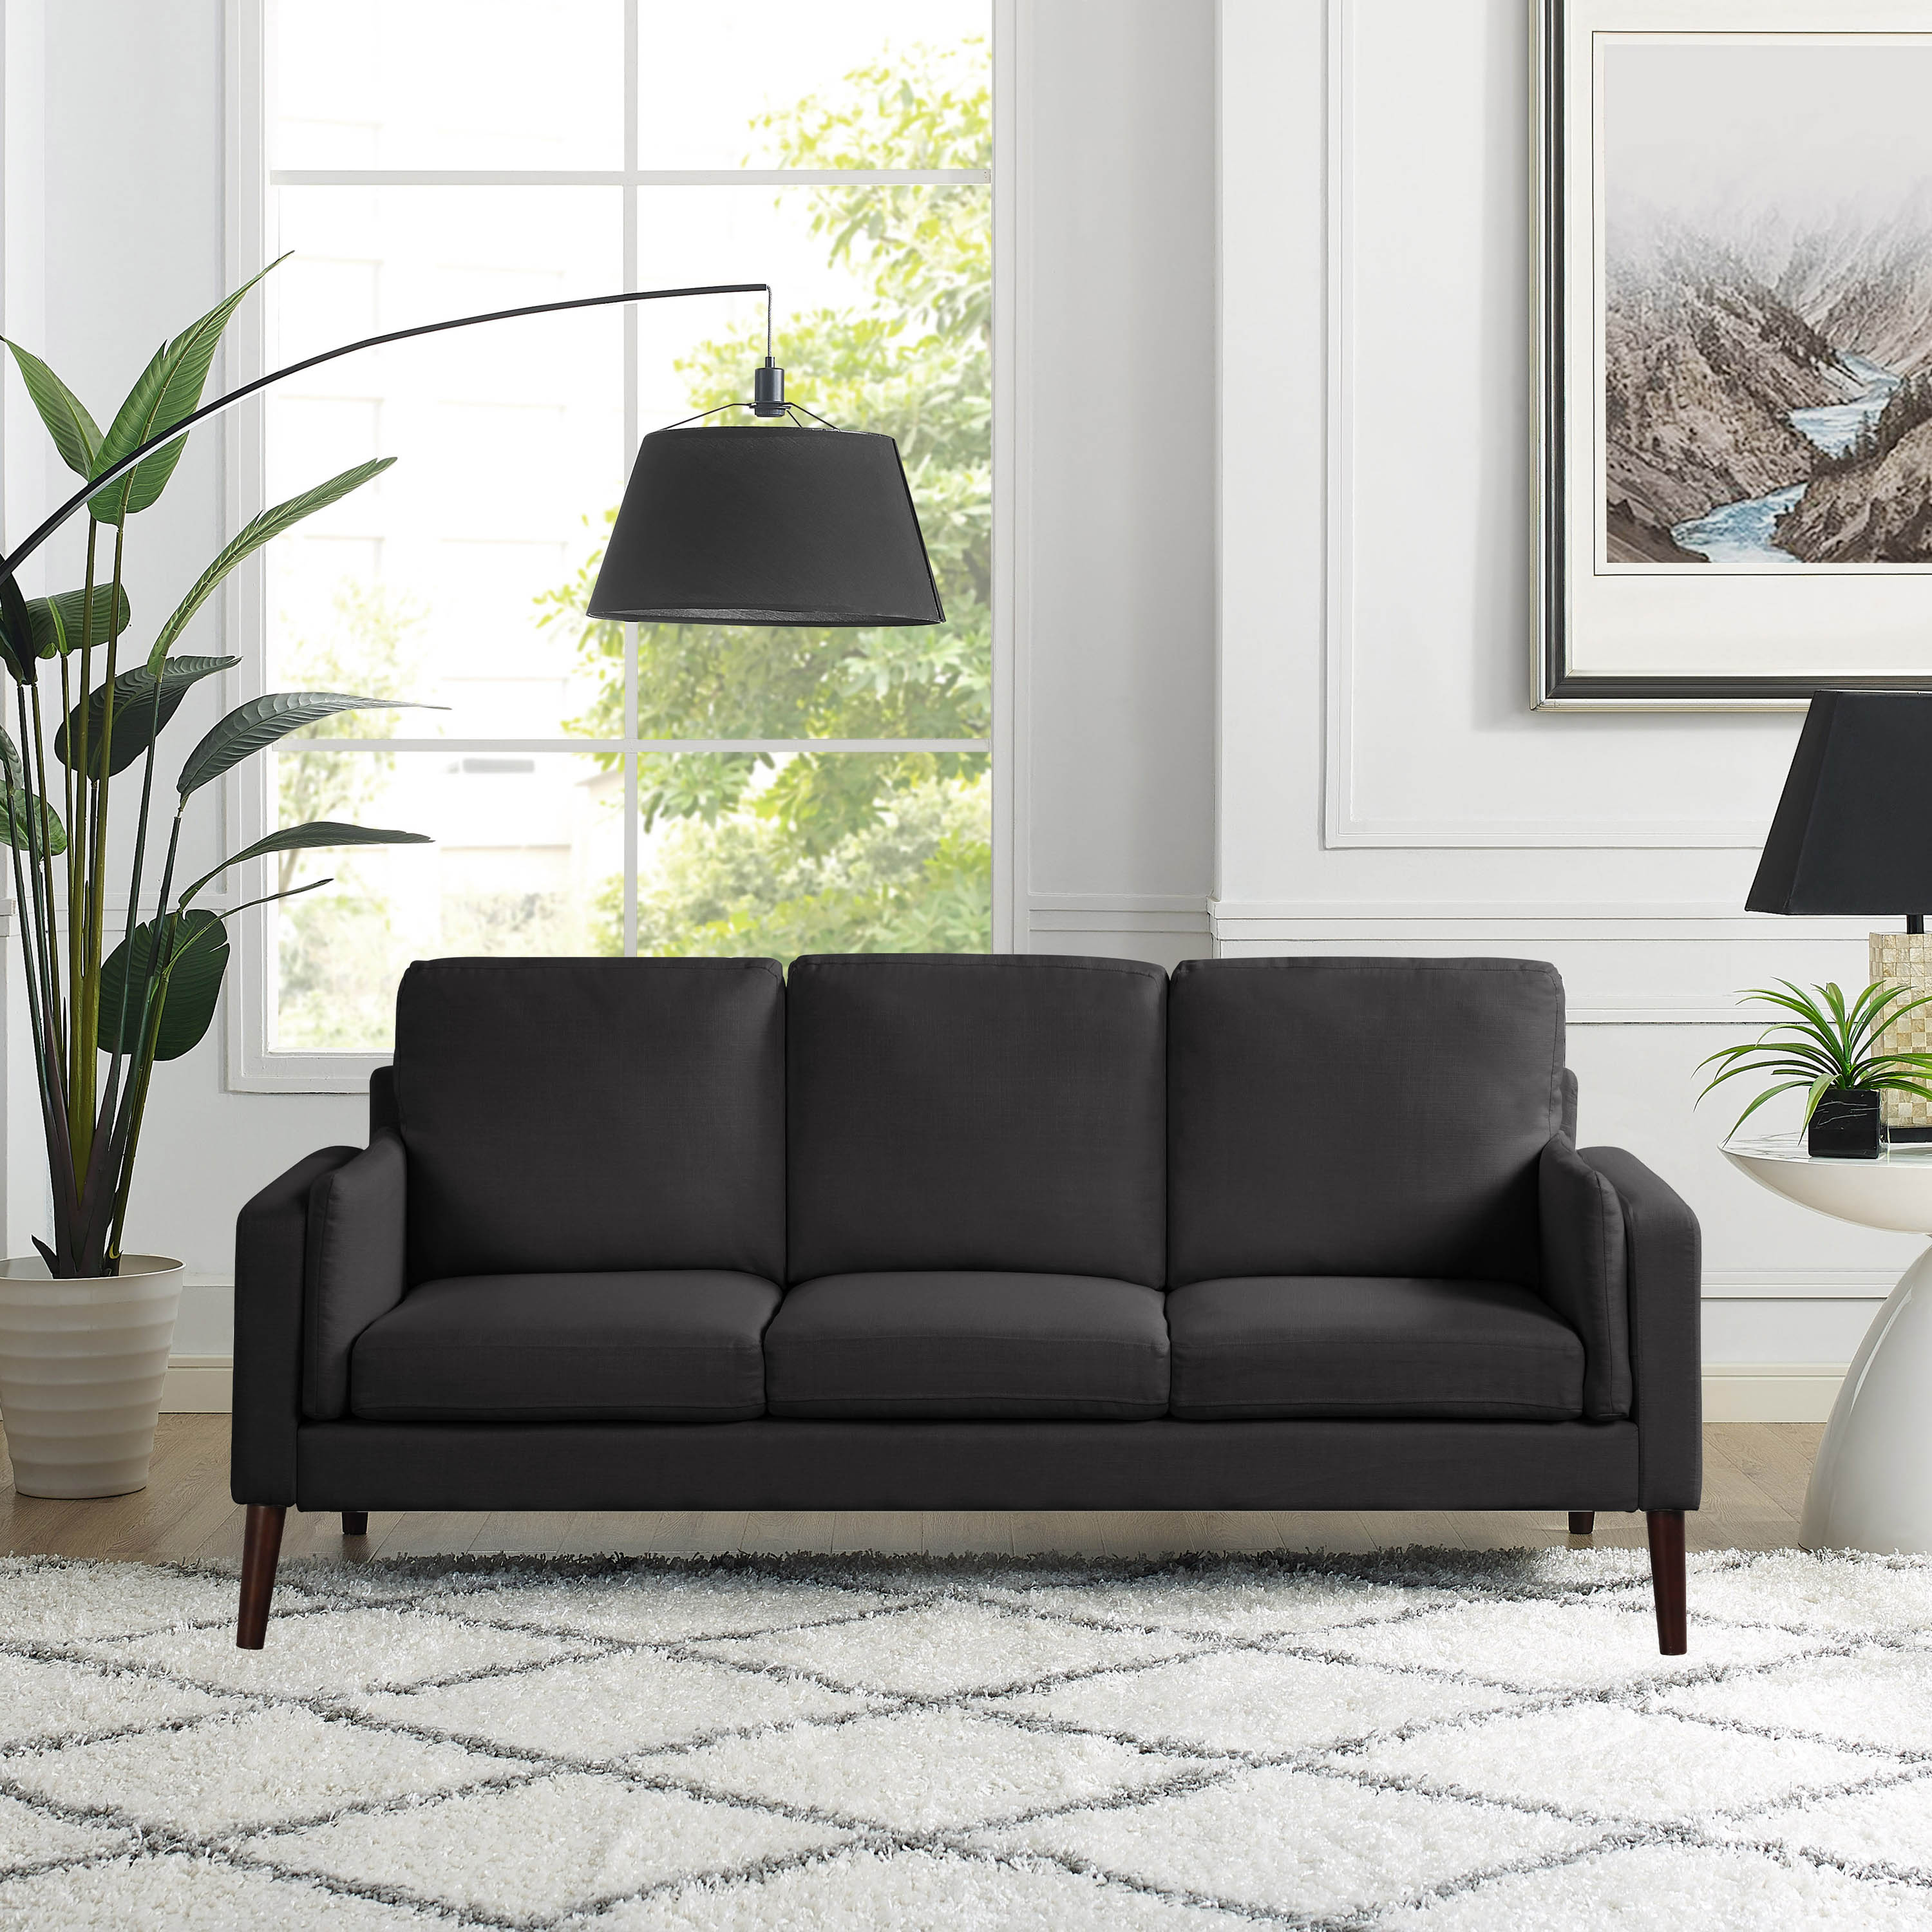 Elm & Oak Nathaniel Modern Sofa with Side Pocket and USB Power, Black Fabric Upholstery - image 1 of 10